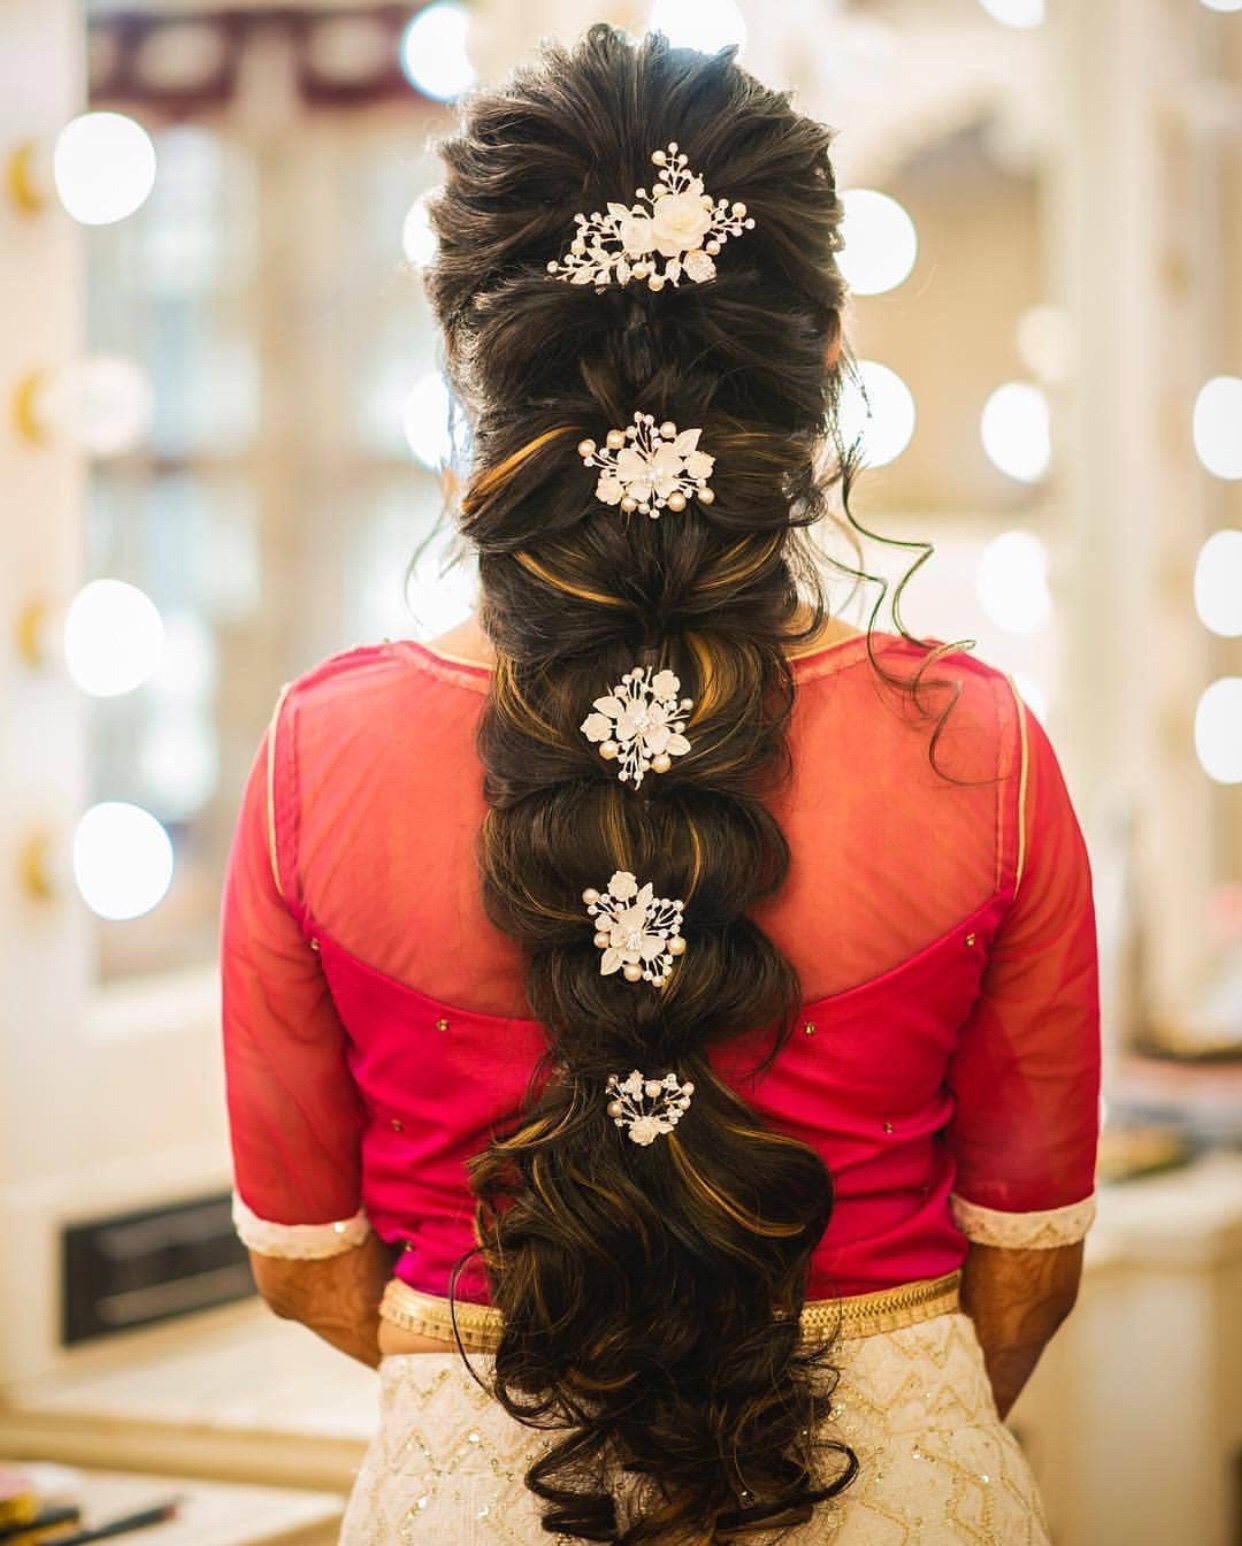 15 Christian Bridal Hairstyles for the Indian Bride